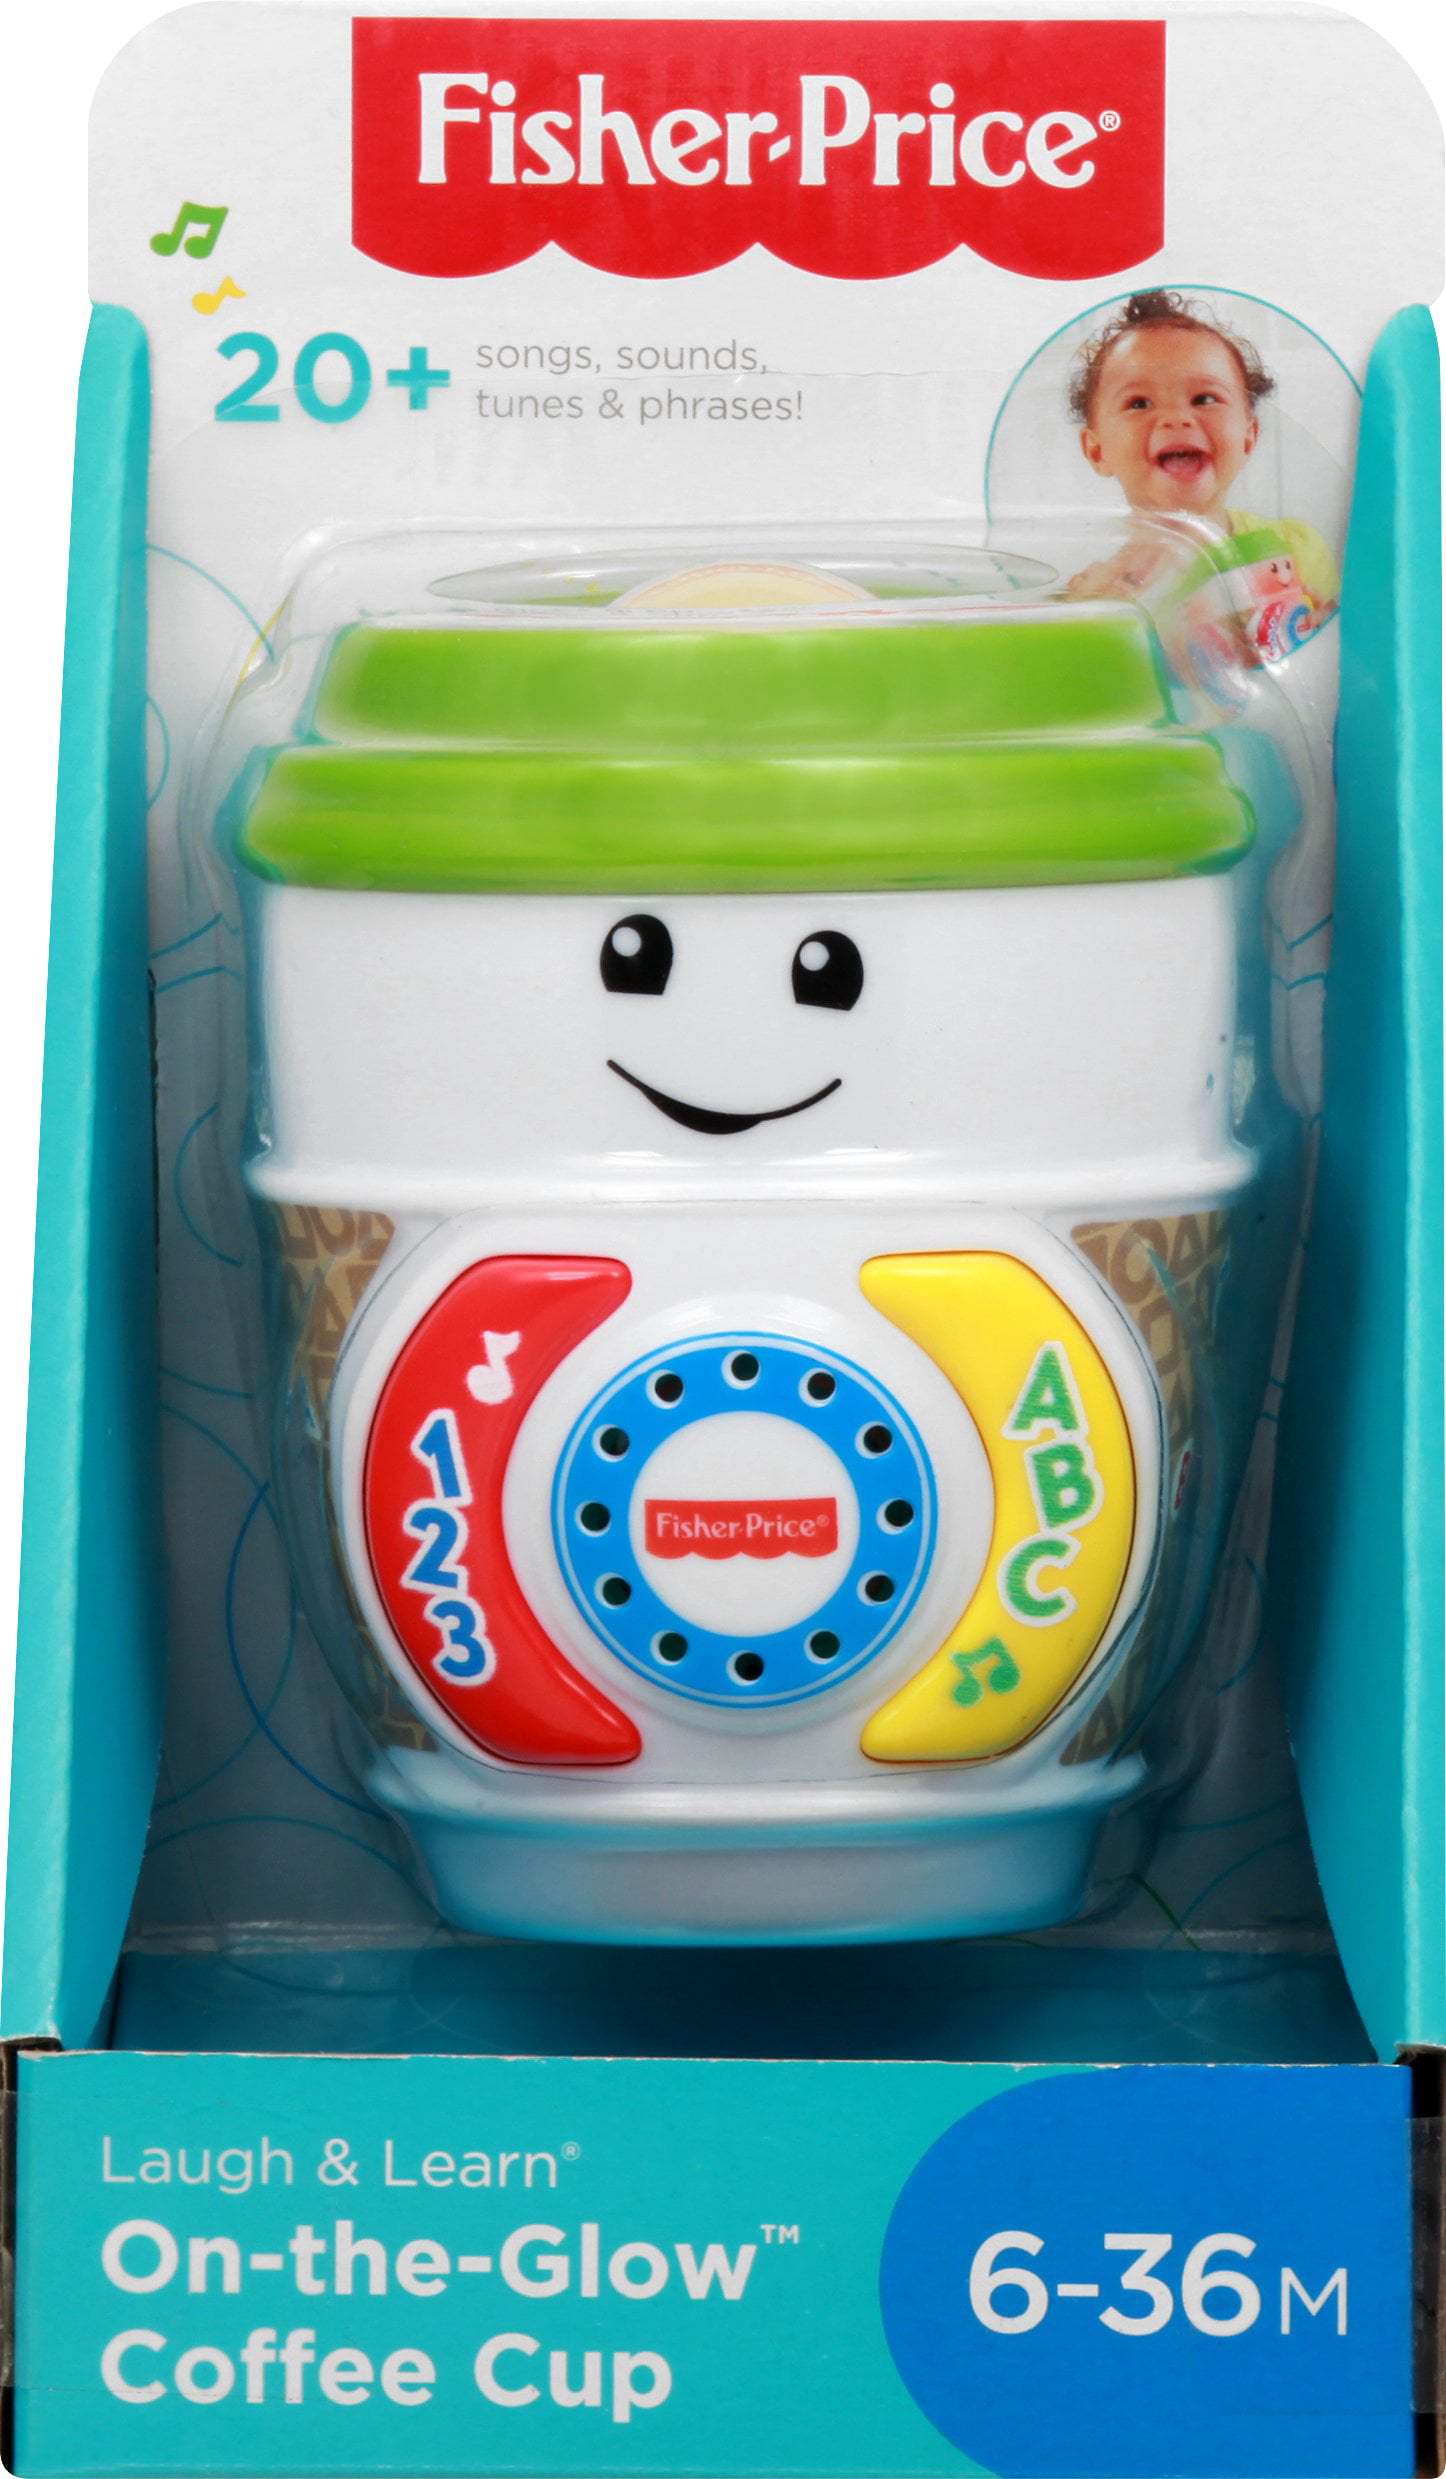  Fisher-Price Laugh & Learn Baby Mug Toy - Only $9.99